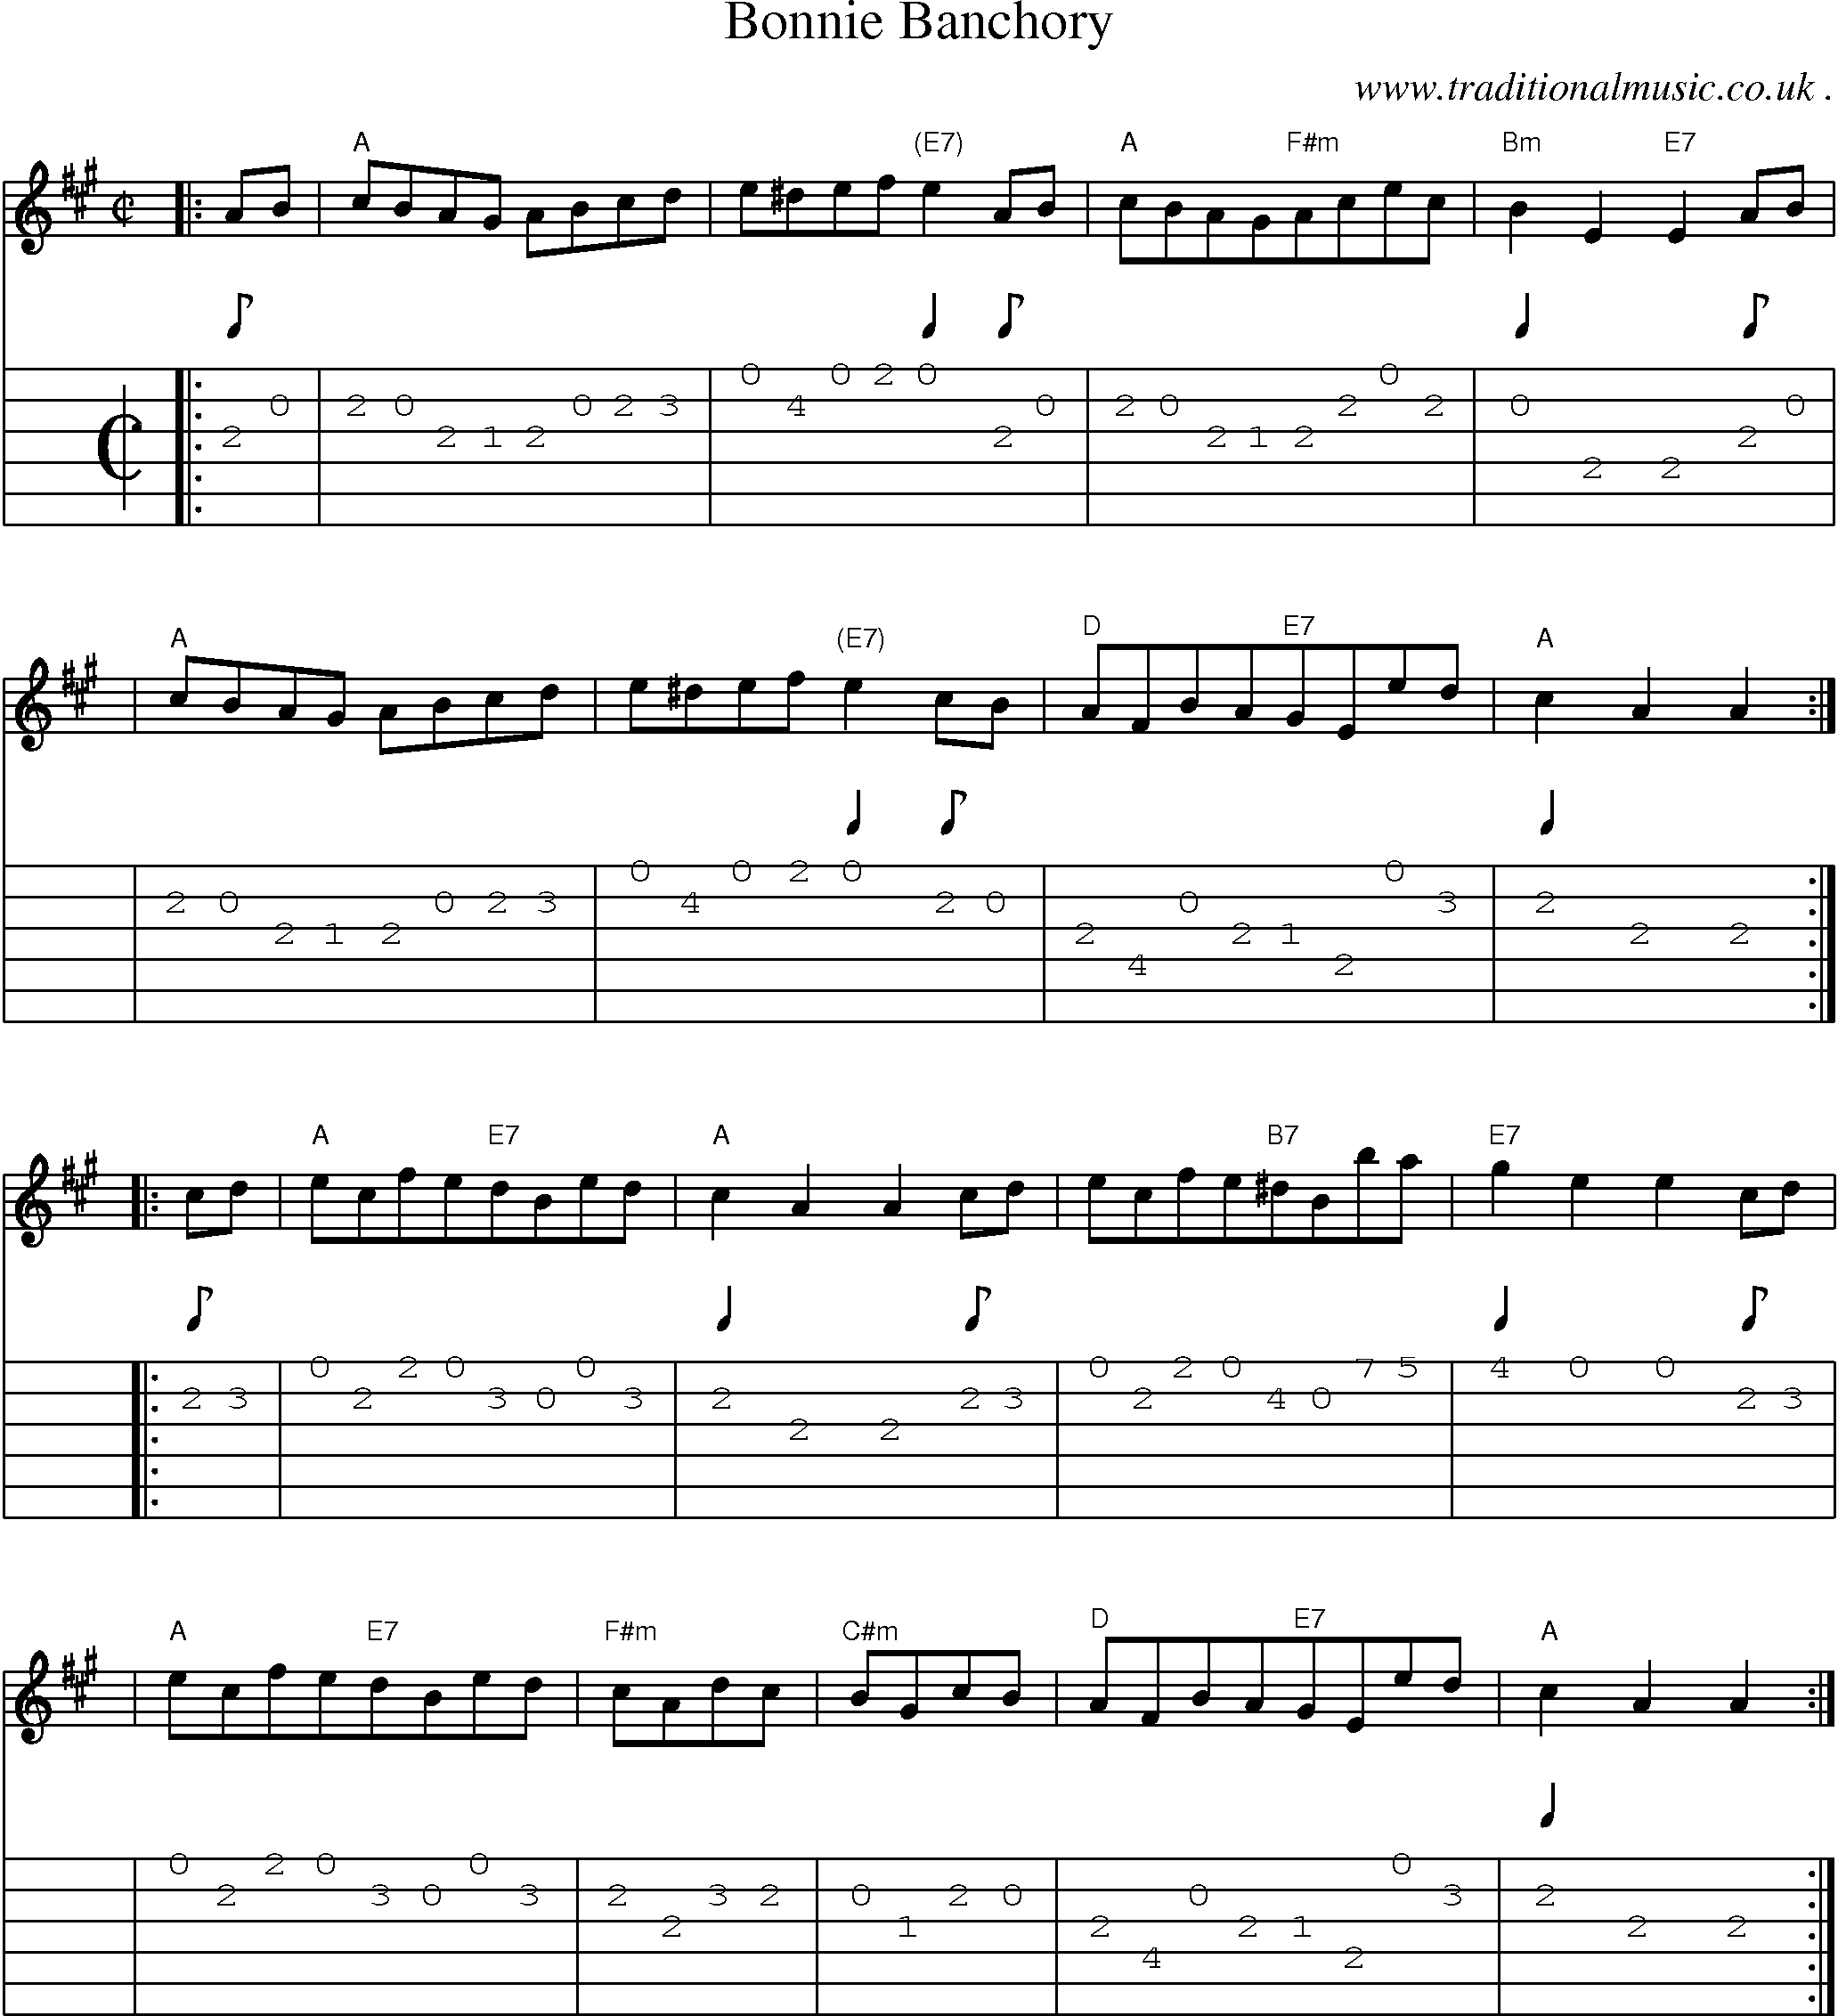 Sheet-Music and Guitar Tabs for Bonnie Banchory